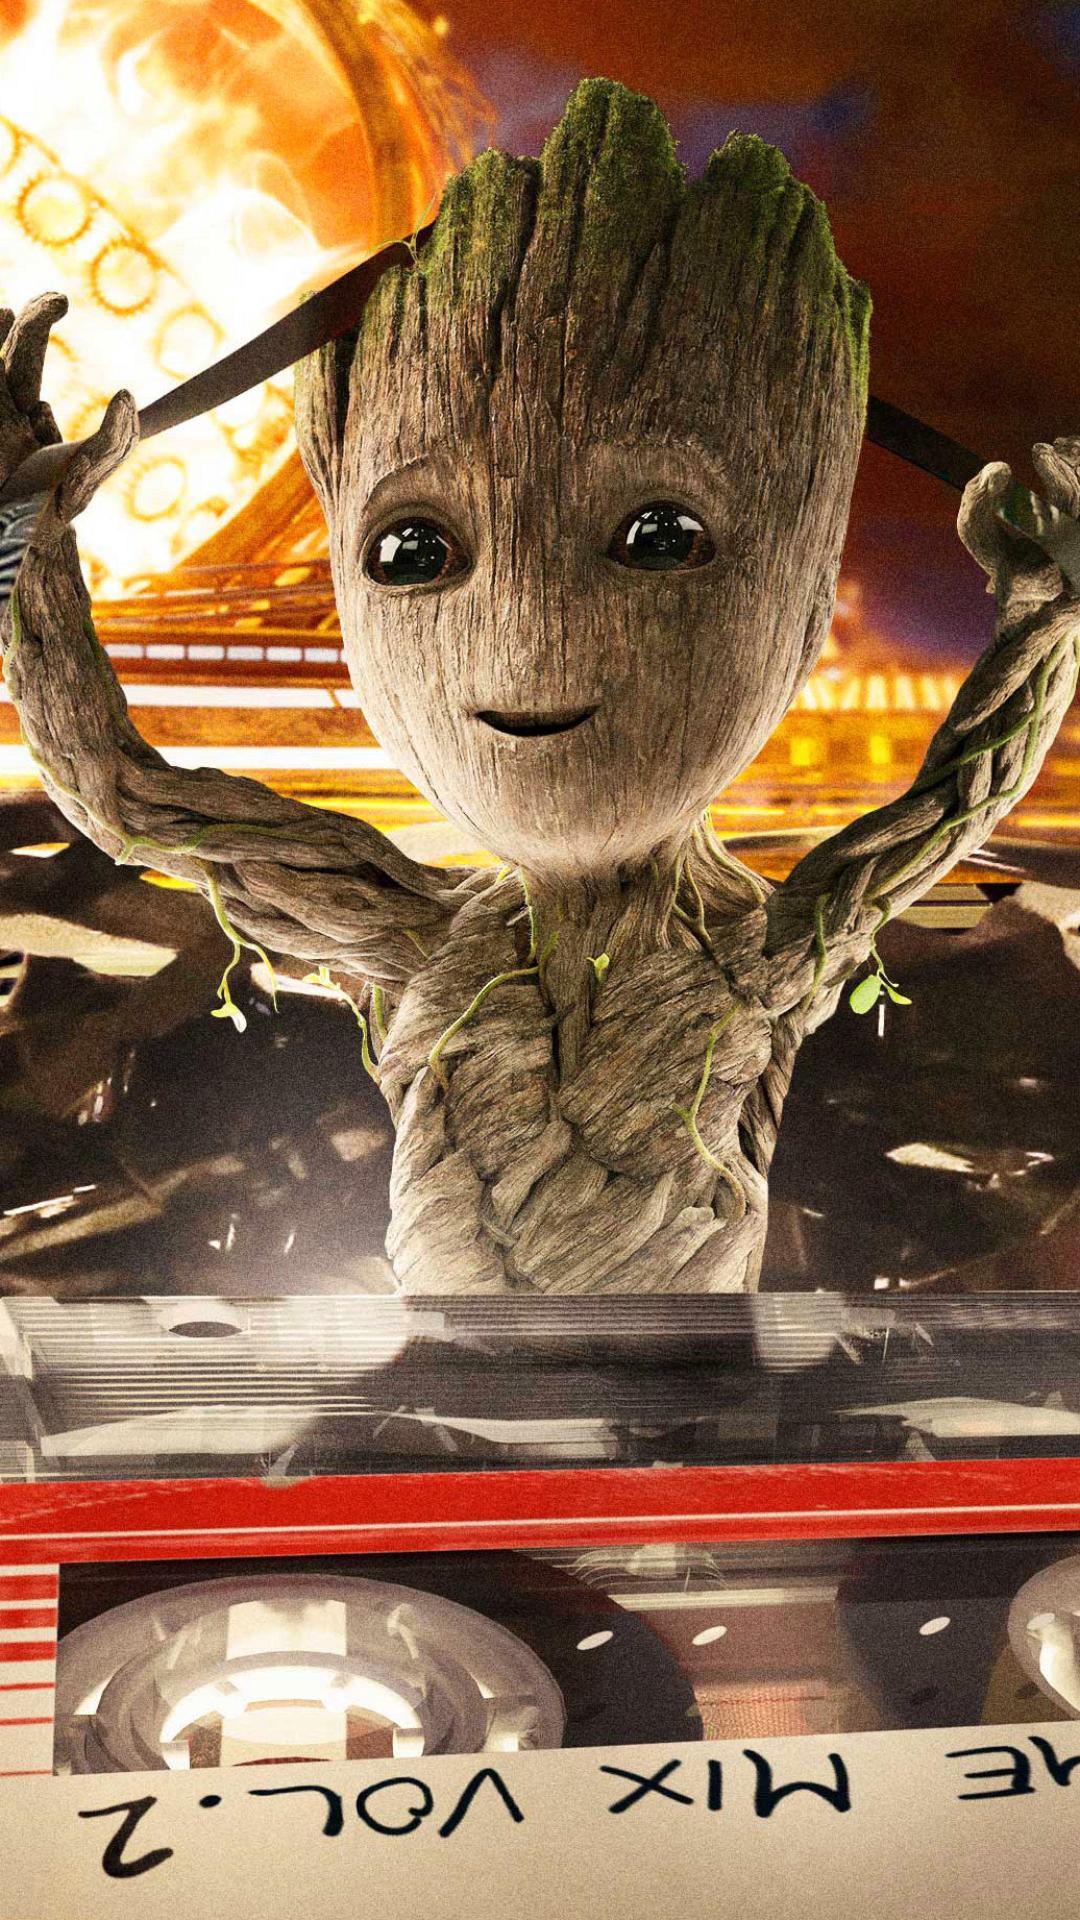 Guardians Of The Galaxy iPhone Wallpaper, Picture